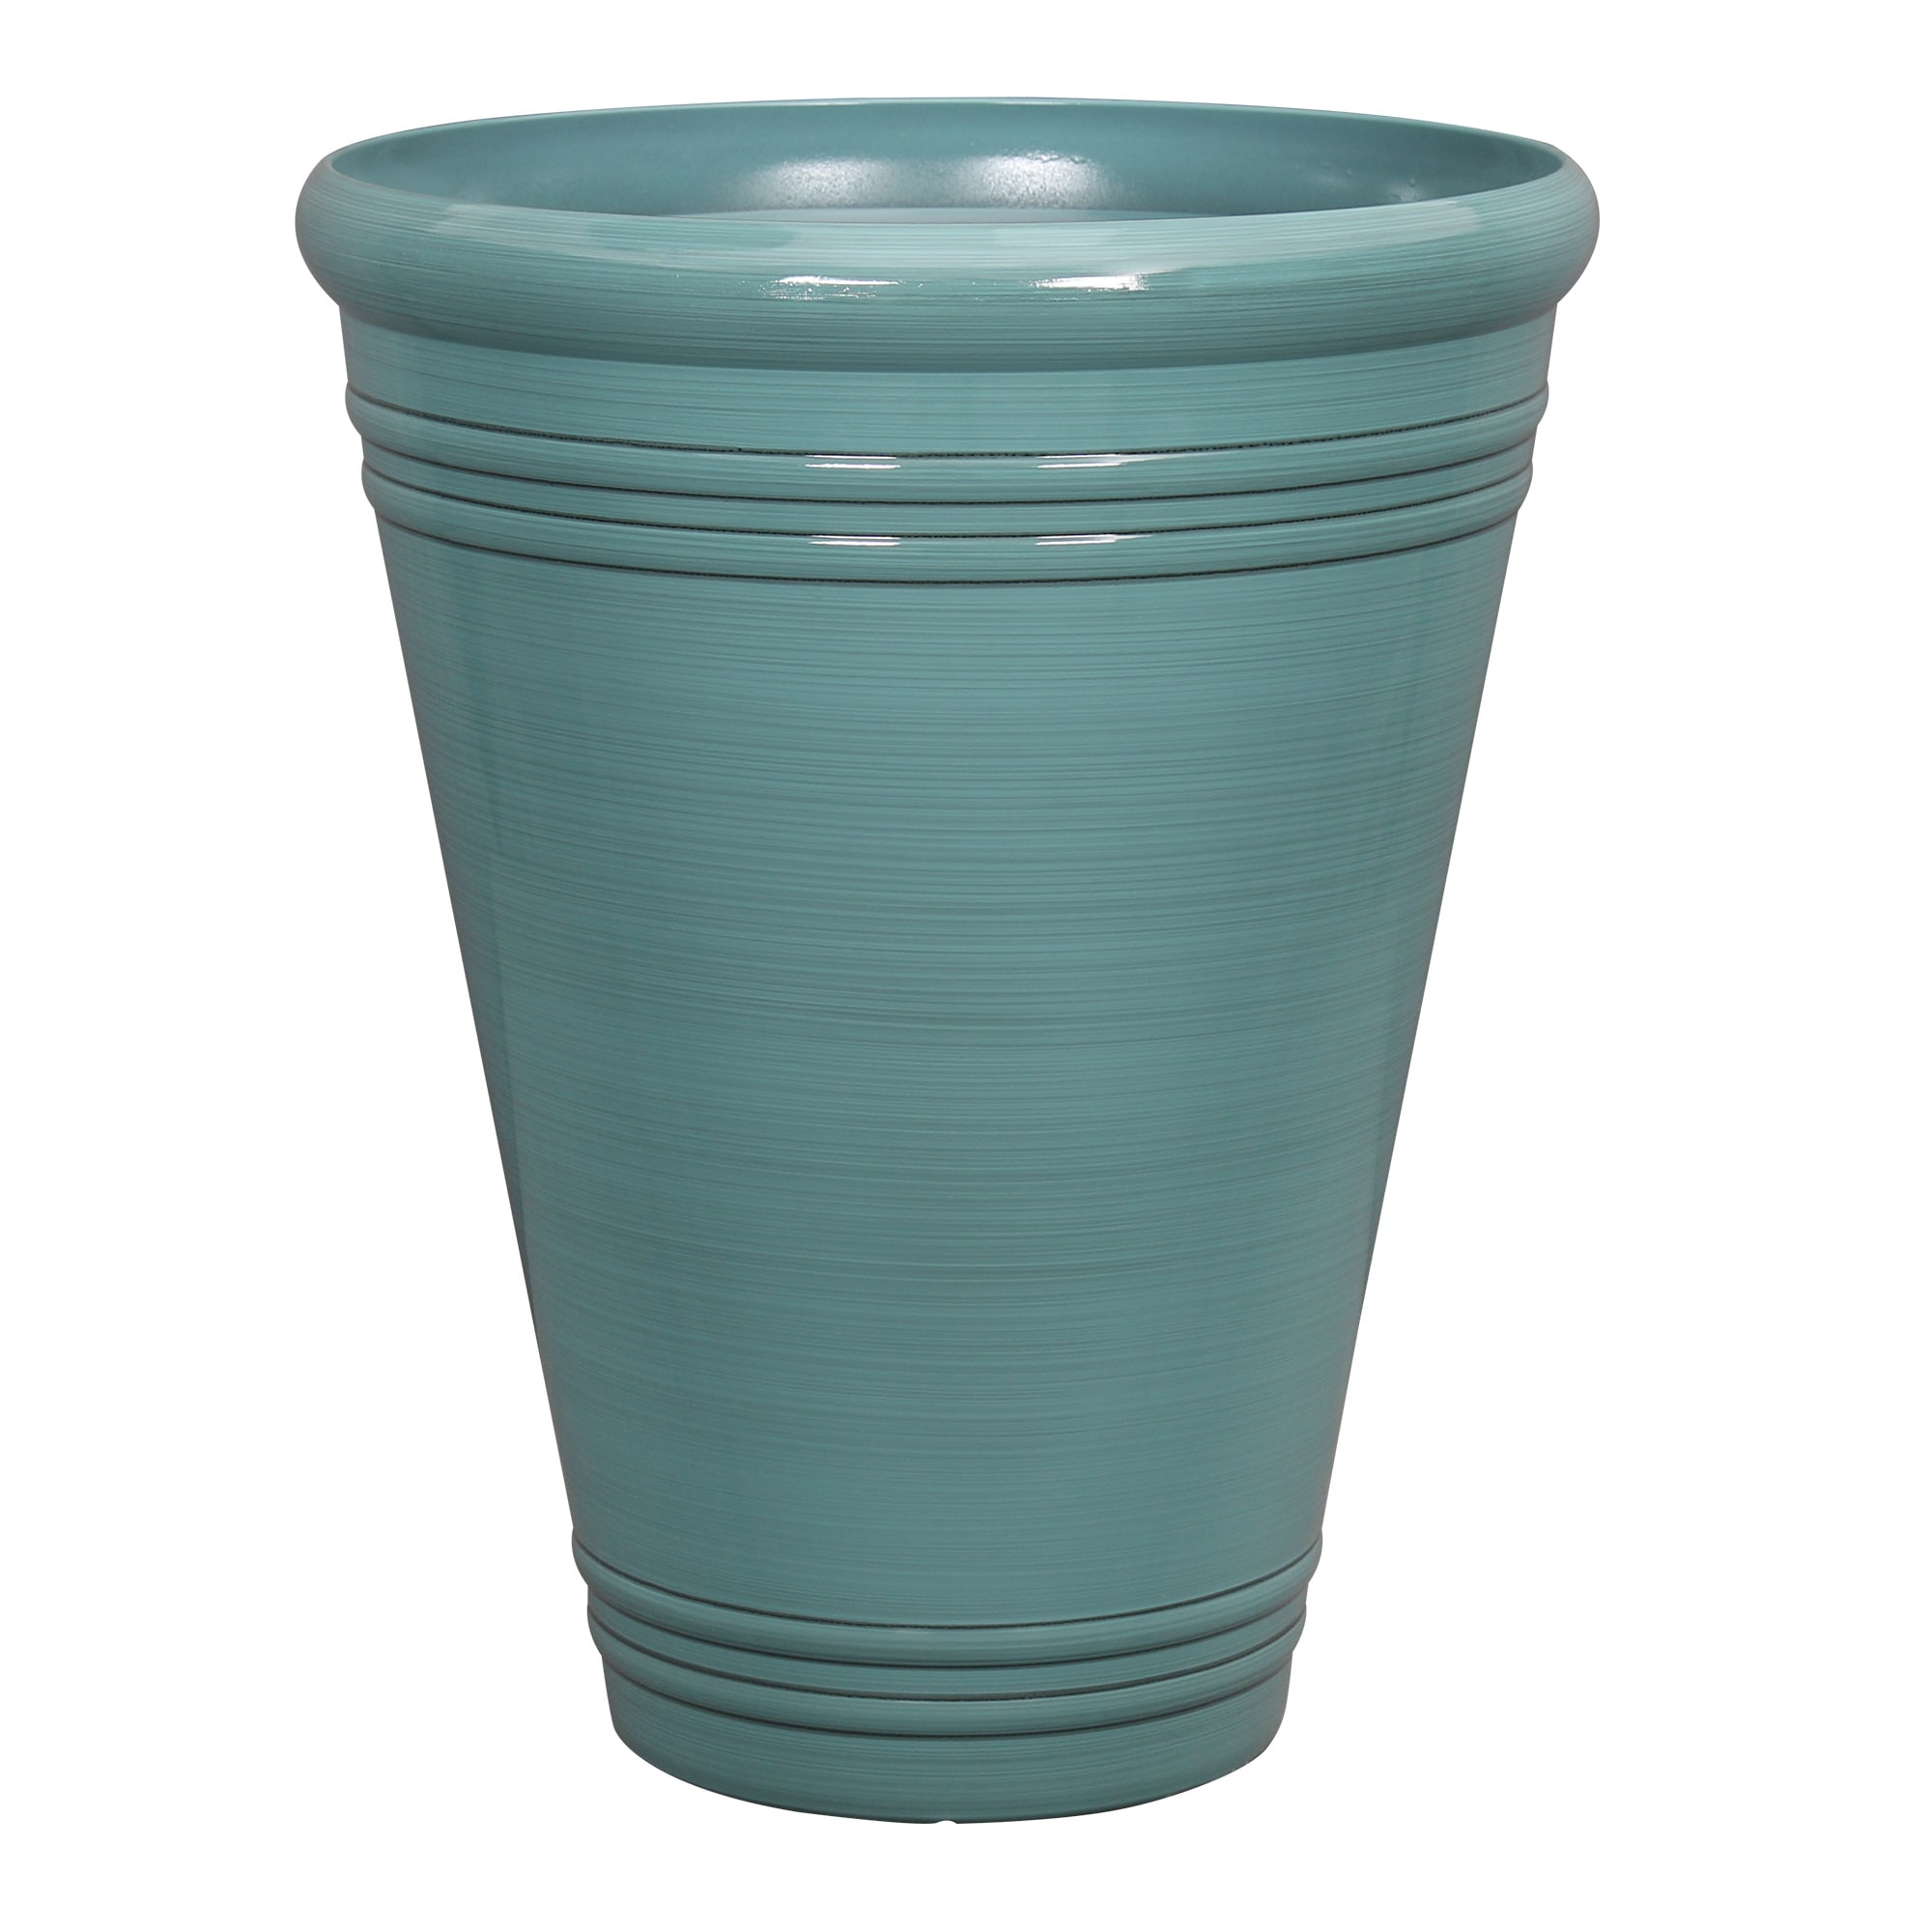 Rosalind Blue Outdoor Planter, Extra Large